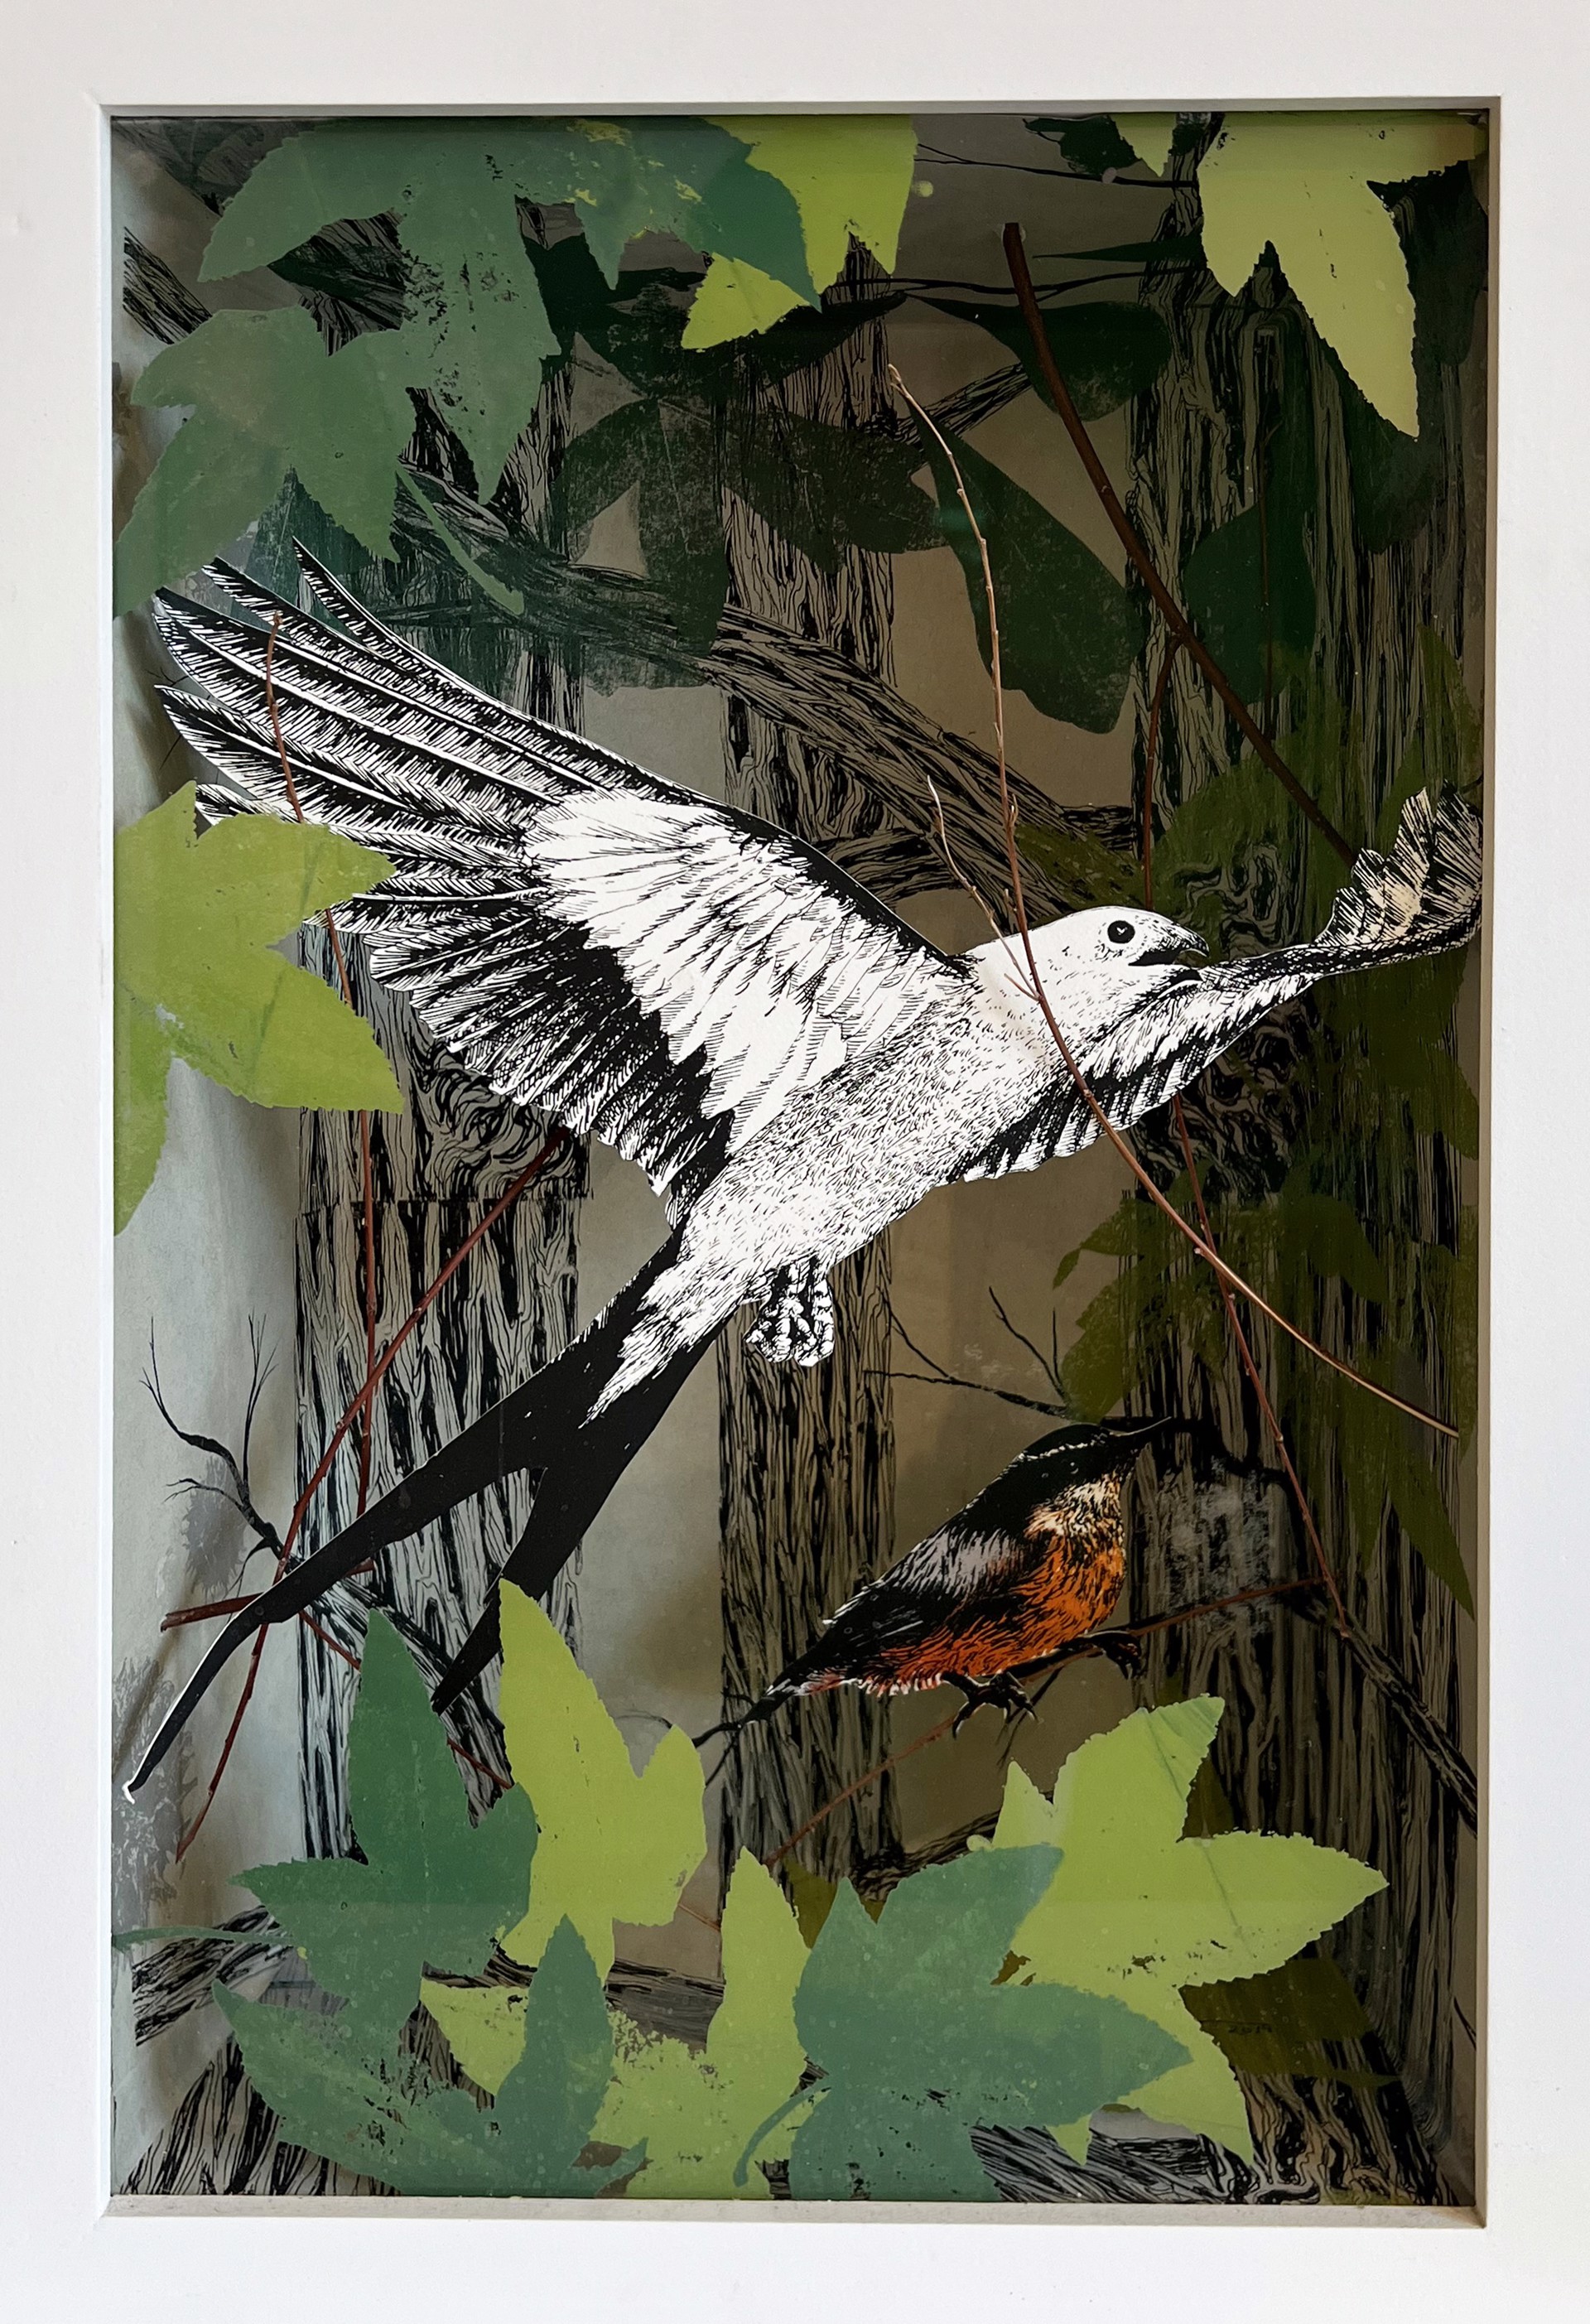 "Kite and Nuthatch in Bottomland" by Pippin Frisbie-Calder